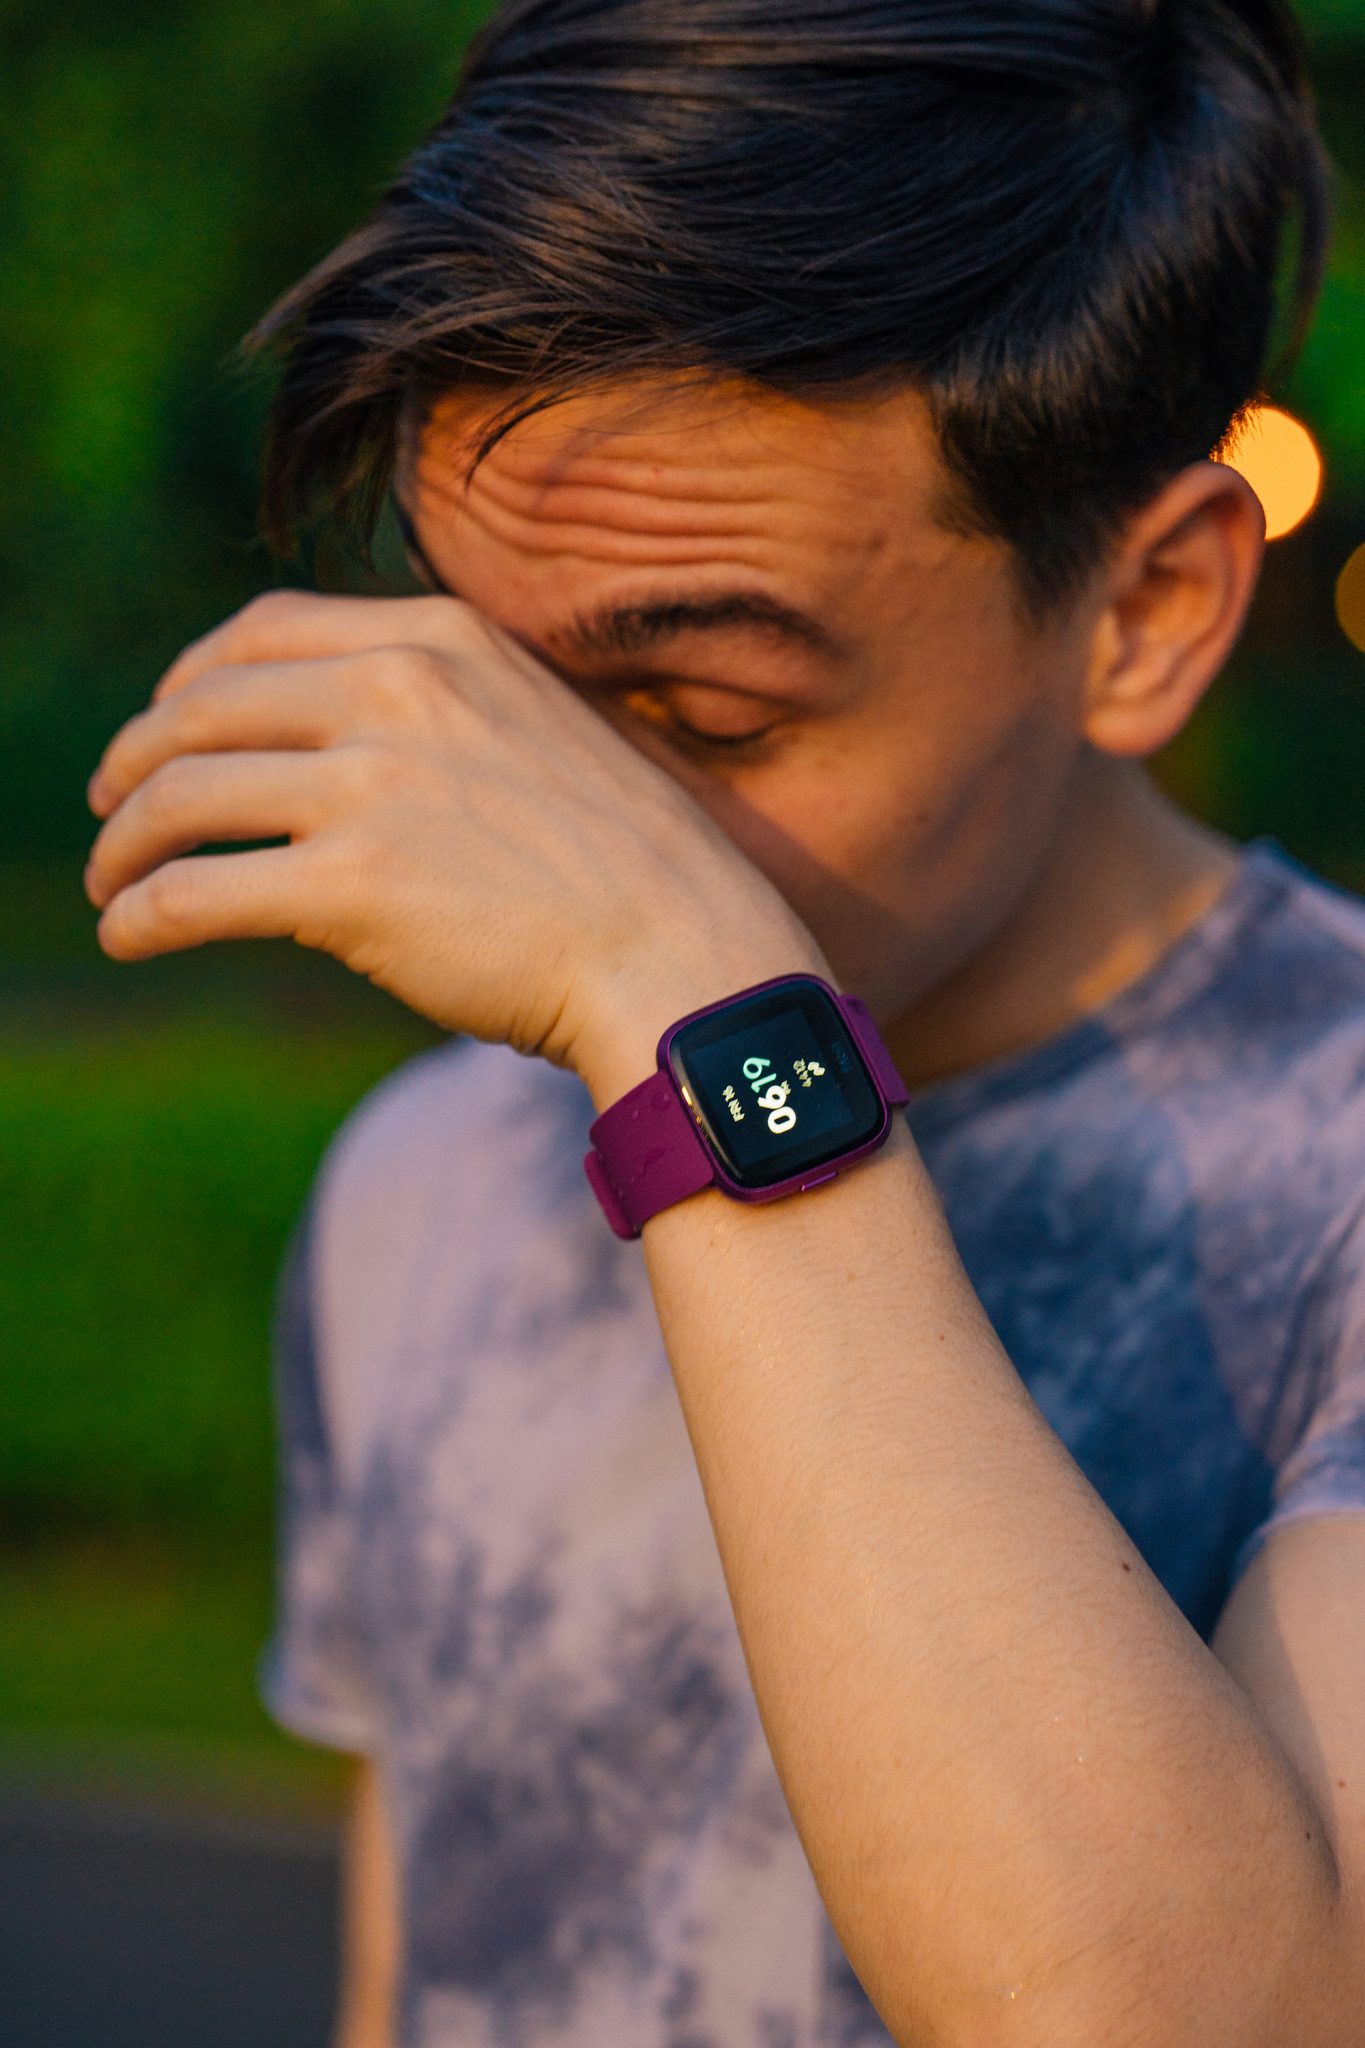 The Fitbit Versa Lite, when worn to sleep, gives us access to “sleep insights”